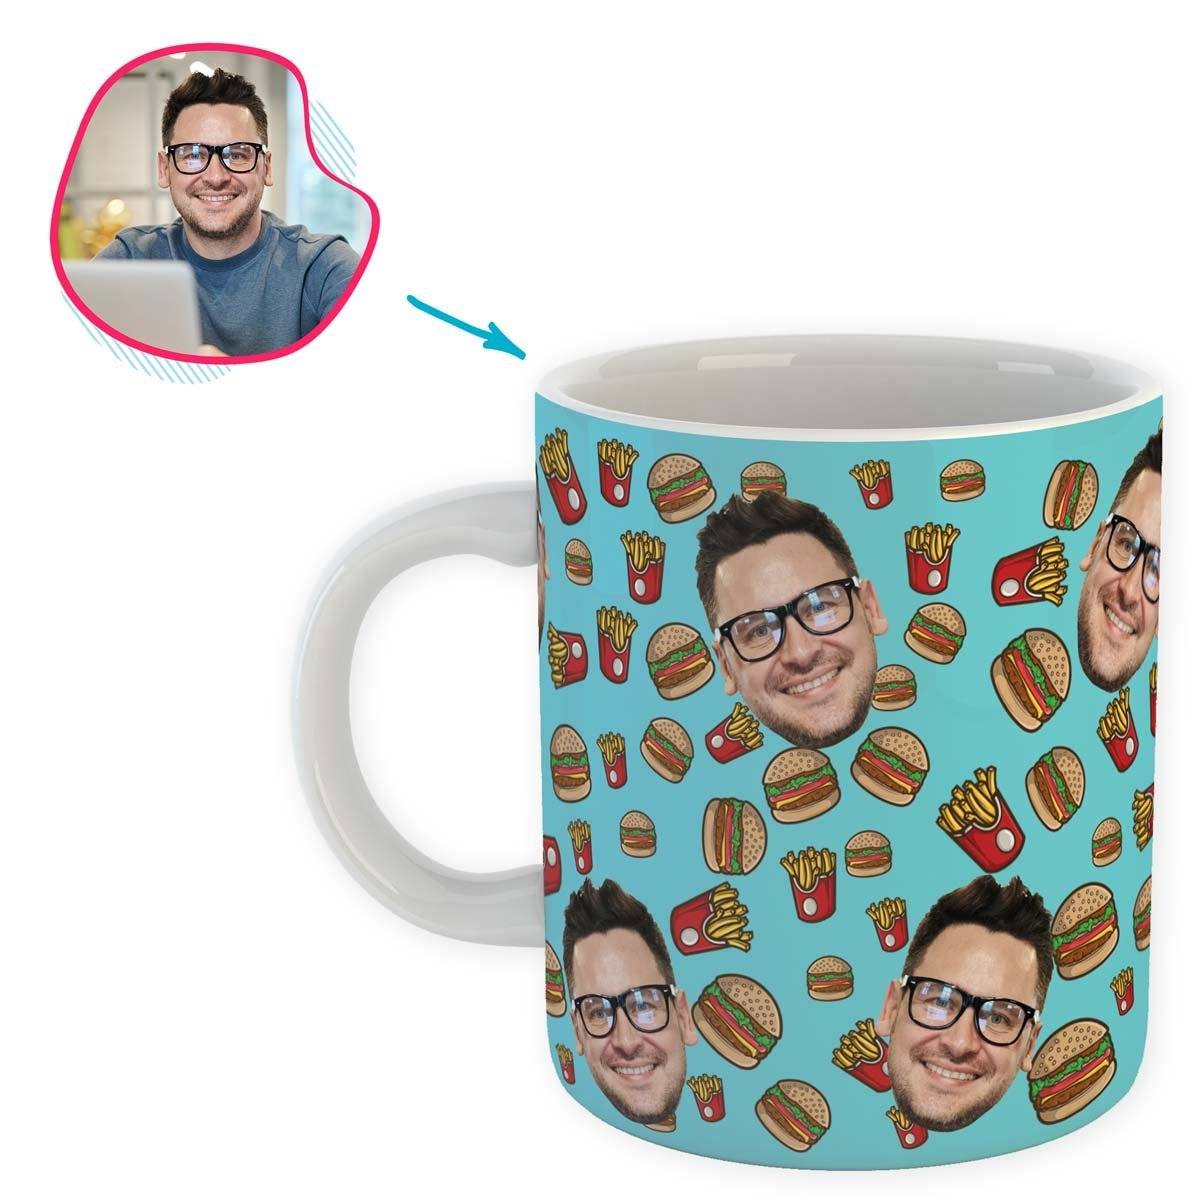 blue Fastfood mug personalized with photo of face printed on it